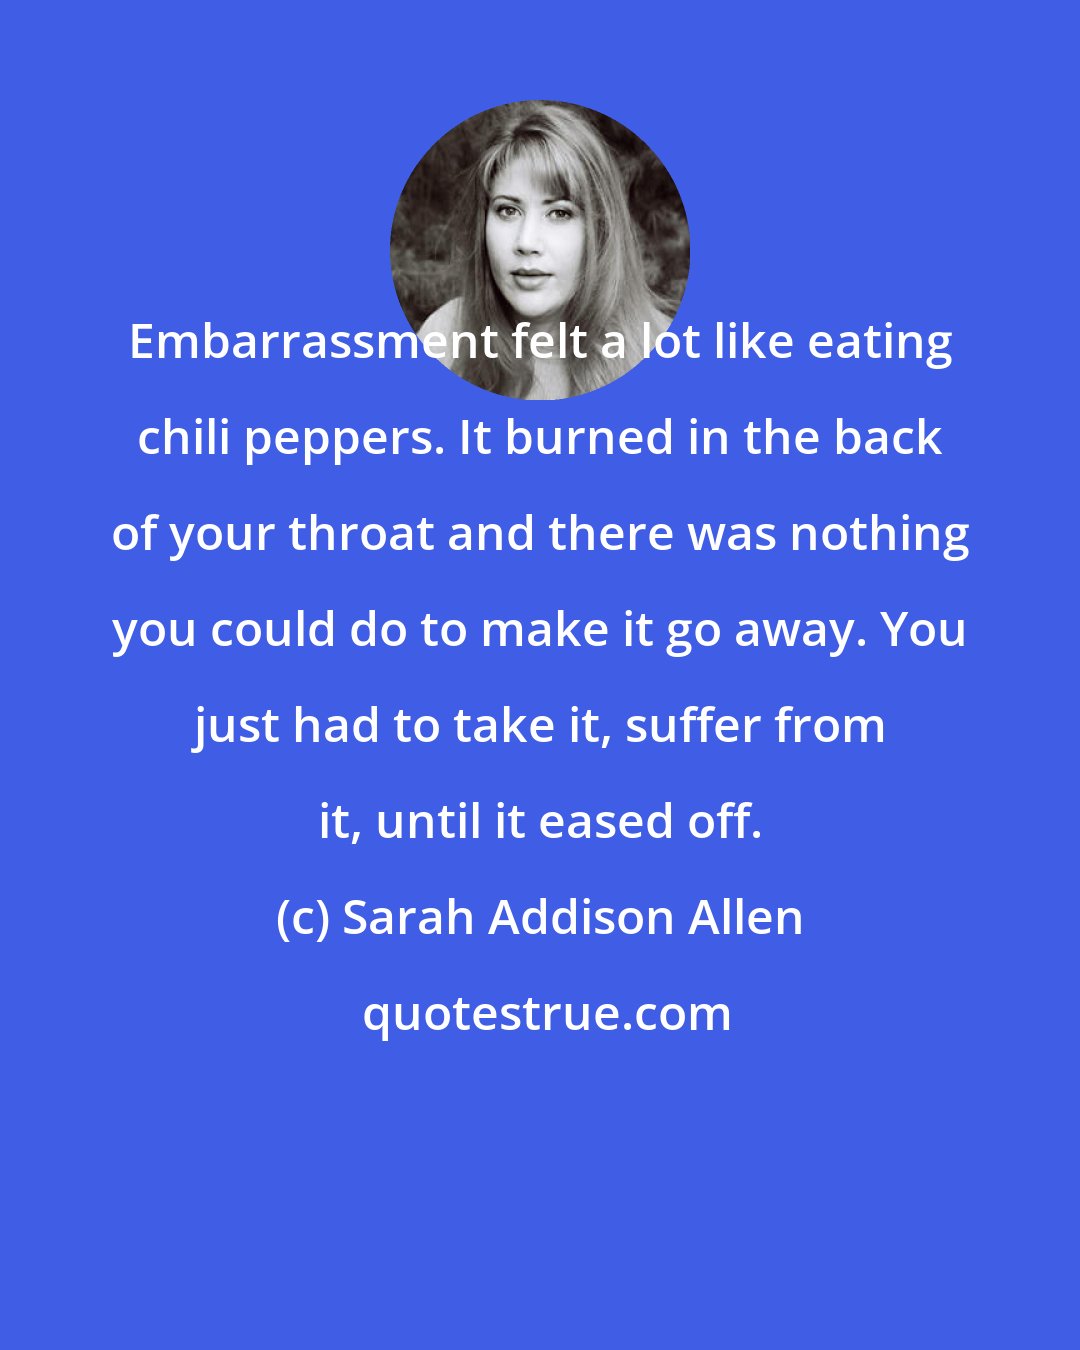 Sarah Addison Allen: Embarrassment felt a lot like eating chili peppers. It burned in the back of your throat and there was nothing you could do to make it go away. You just had to take it, suffer from it, until it eased off.